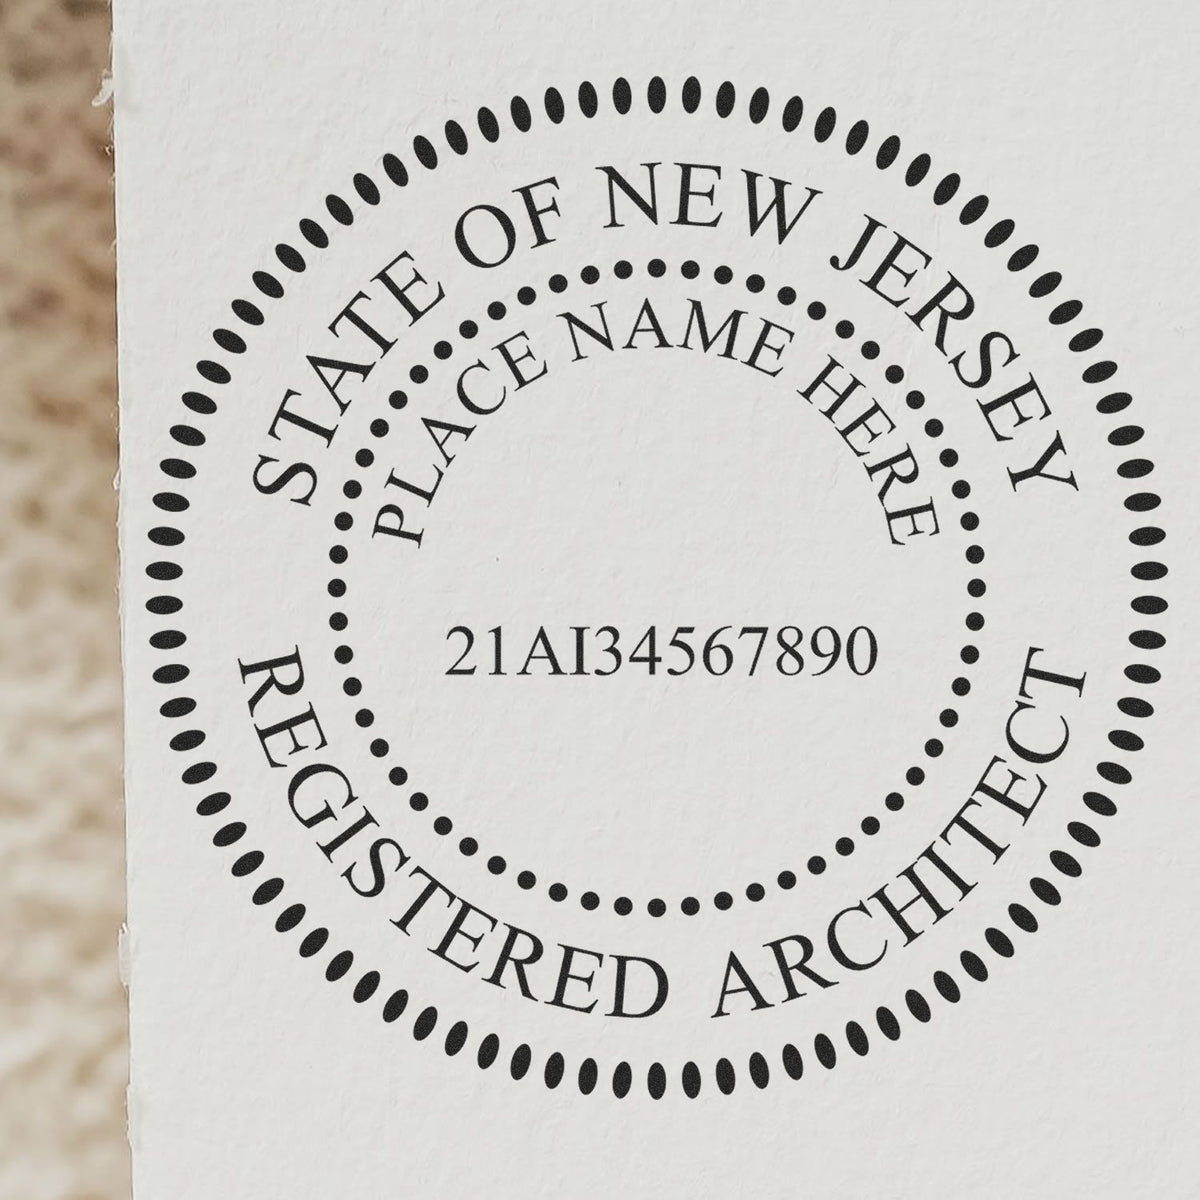 New Jersey Architect Seal Stamp Lifestyle Photo